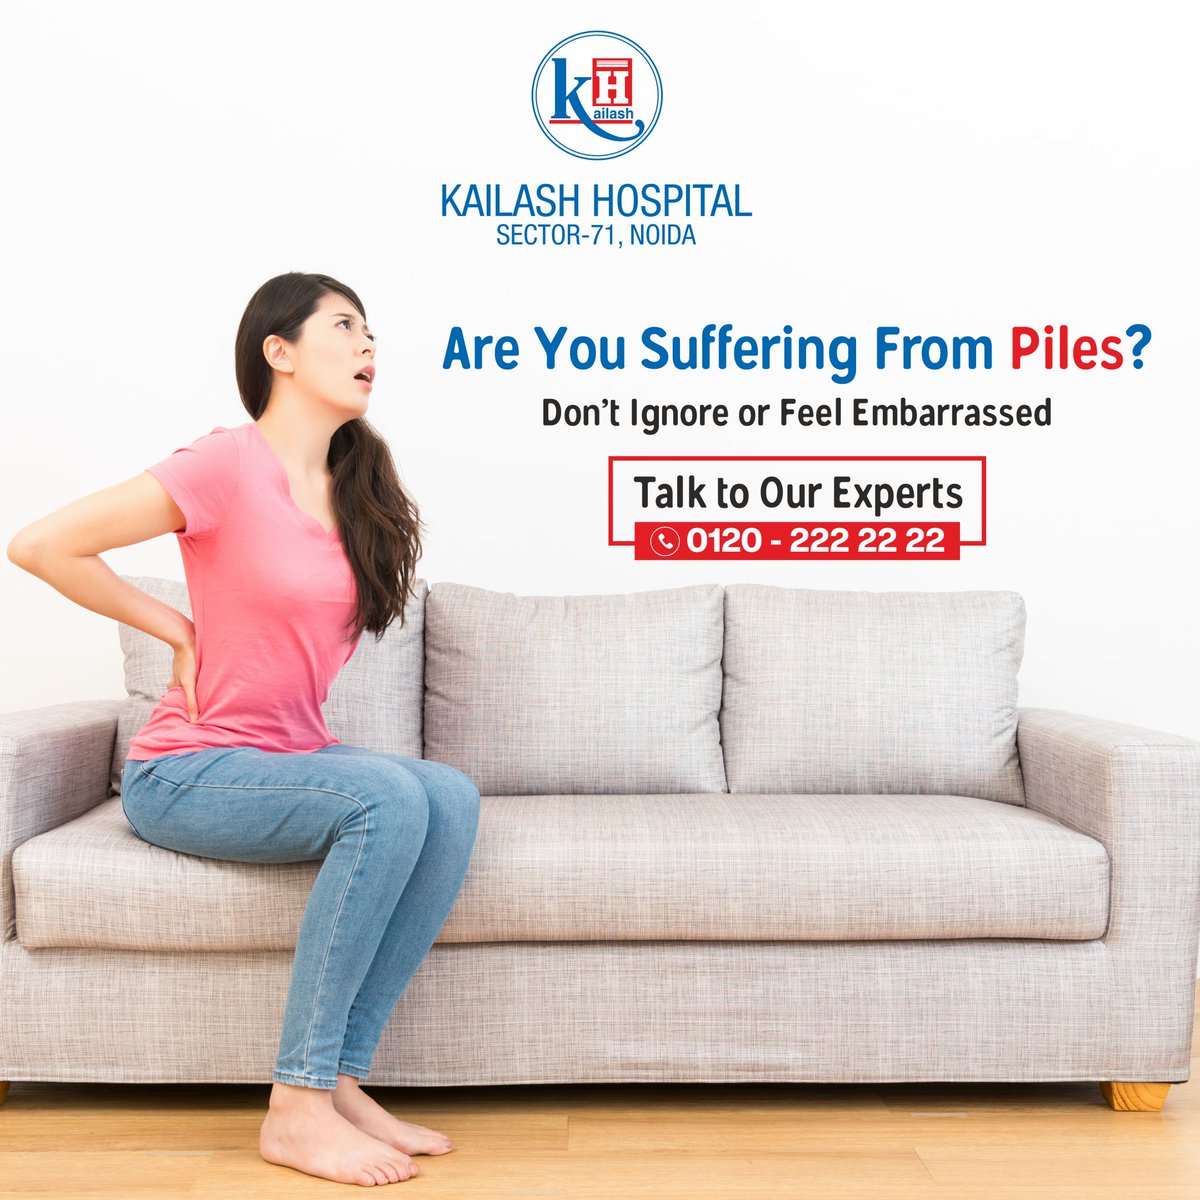 Suffering from Piles? Don't feel embarrassed! Consult with our Expert, Call us at:  0120 222 22 22
#piles #pilestreatment #PilesSurgery #pilesproblem #surgeon #khni71 #KailashHospital